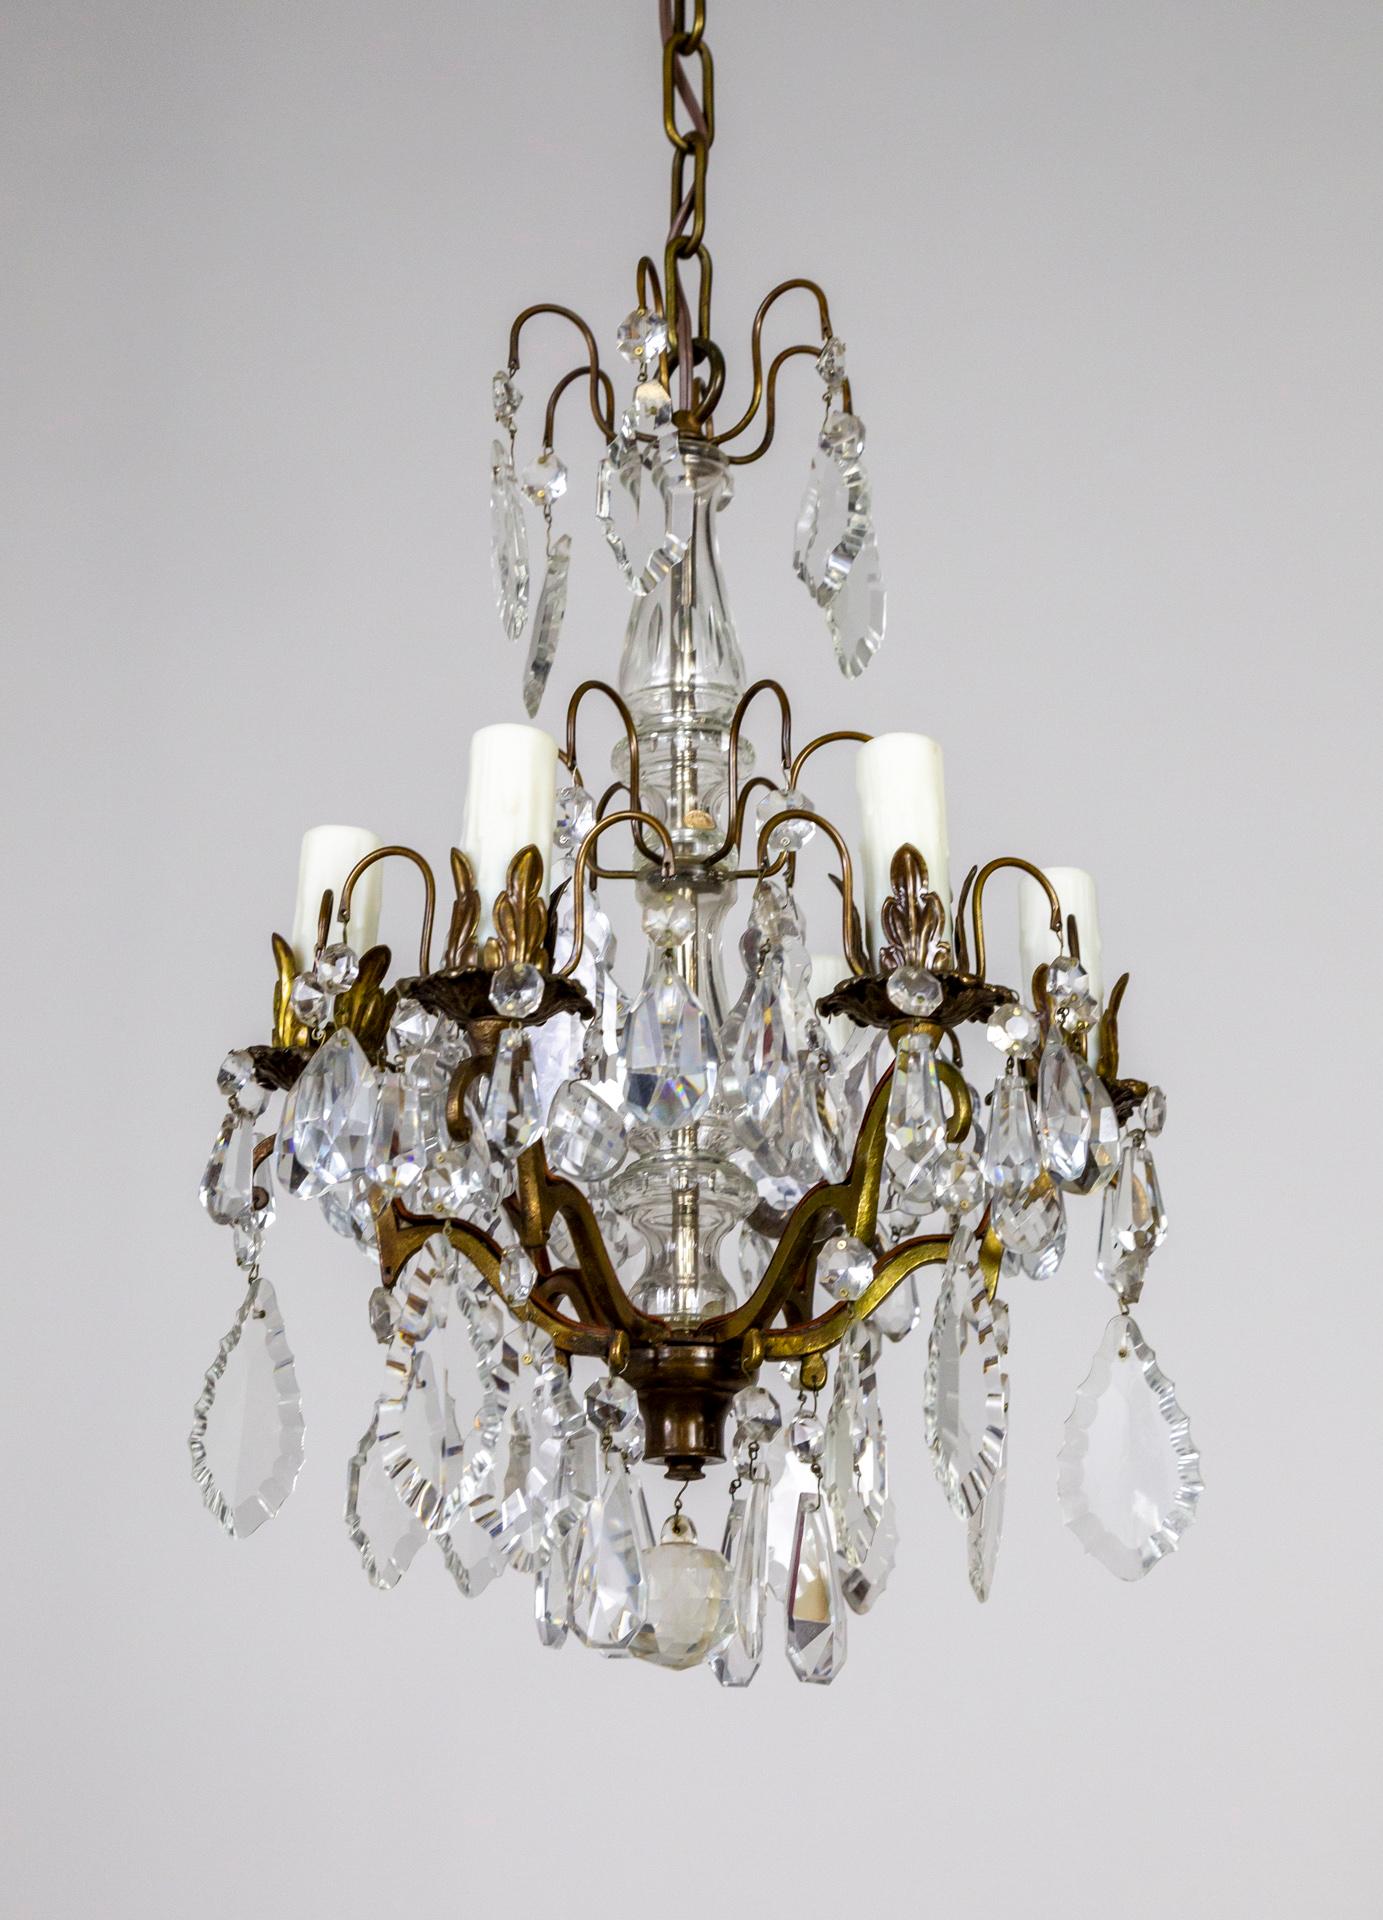 Crystal Decked 6-Light Austrian Chandelier In Good Condition For Sale In San Francisco, CA